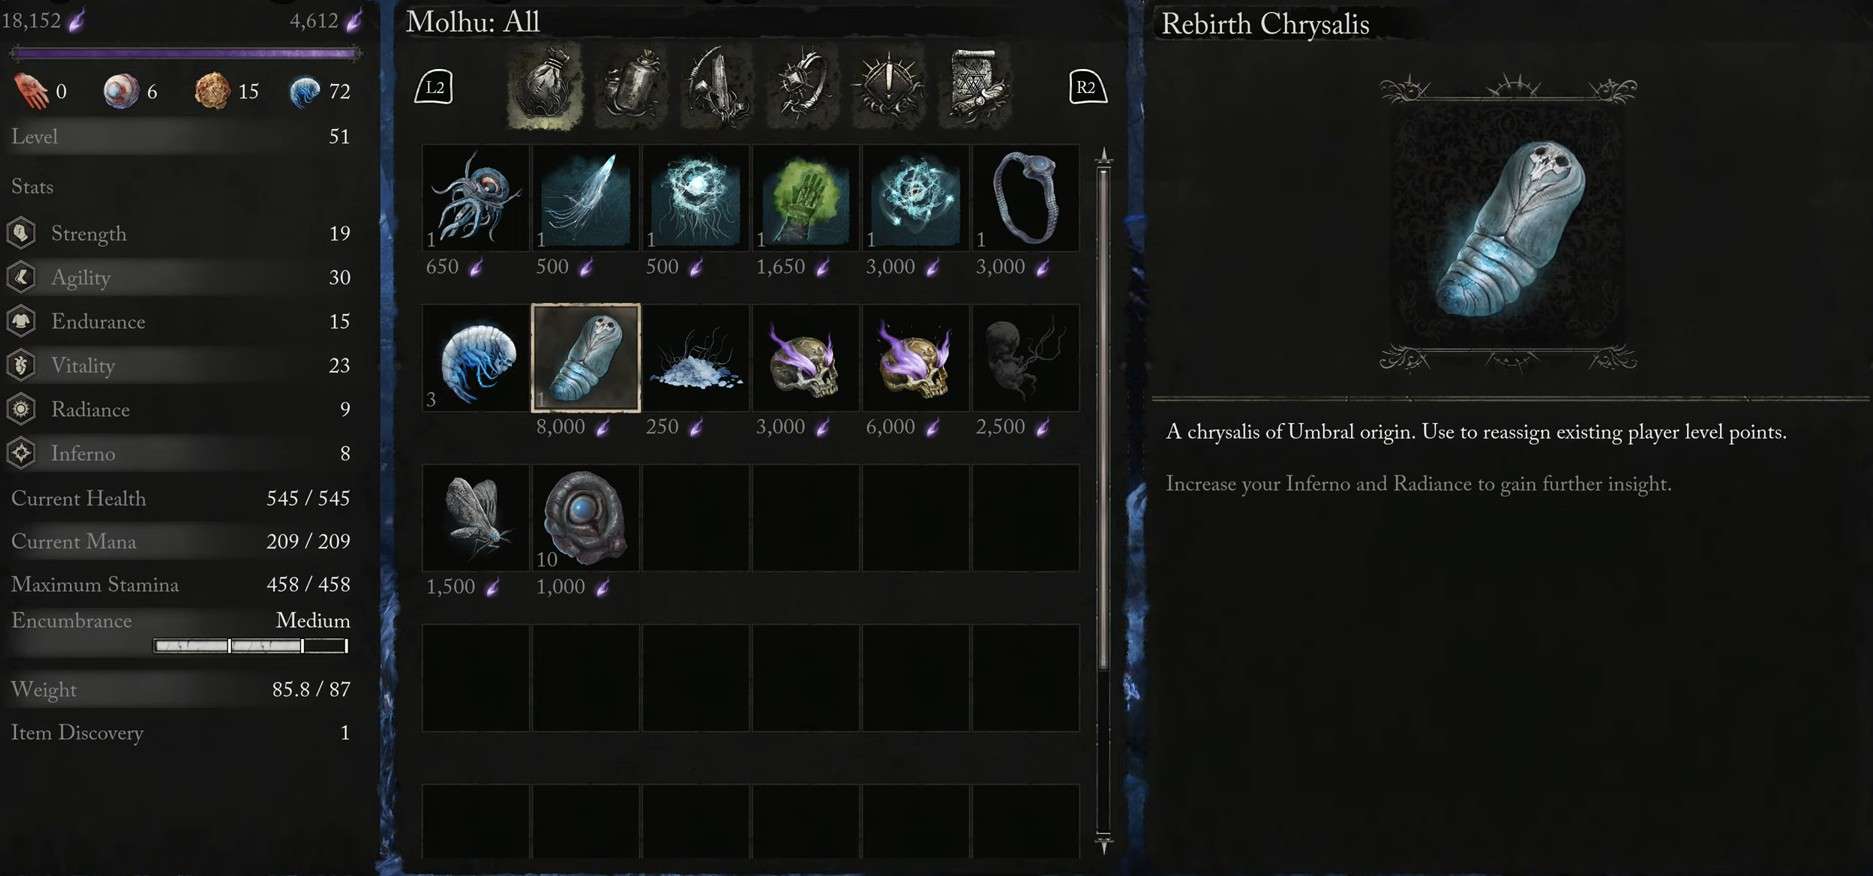 Rebirth Chrysalis in Lords of the Fallen